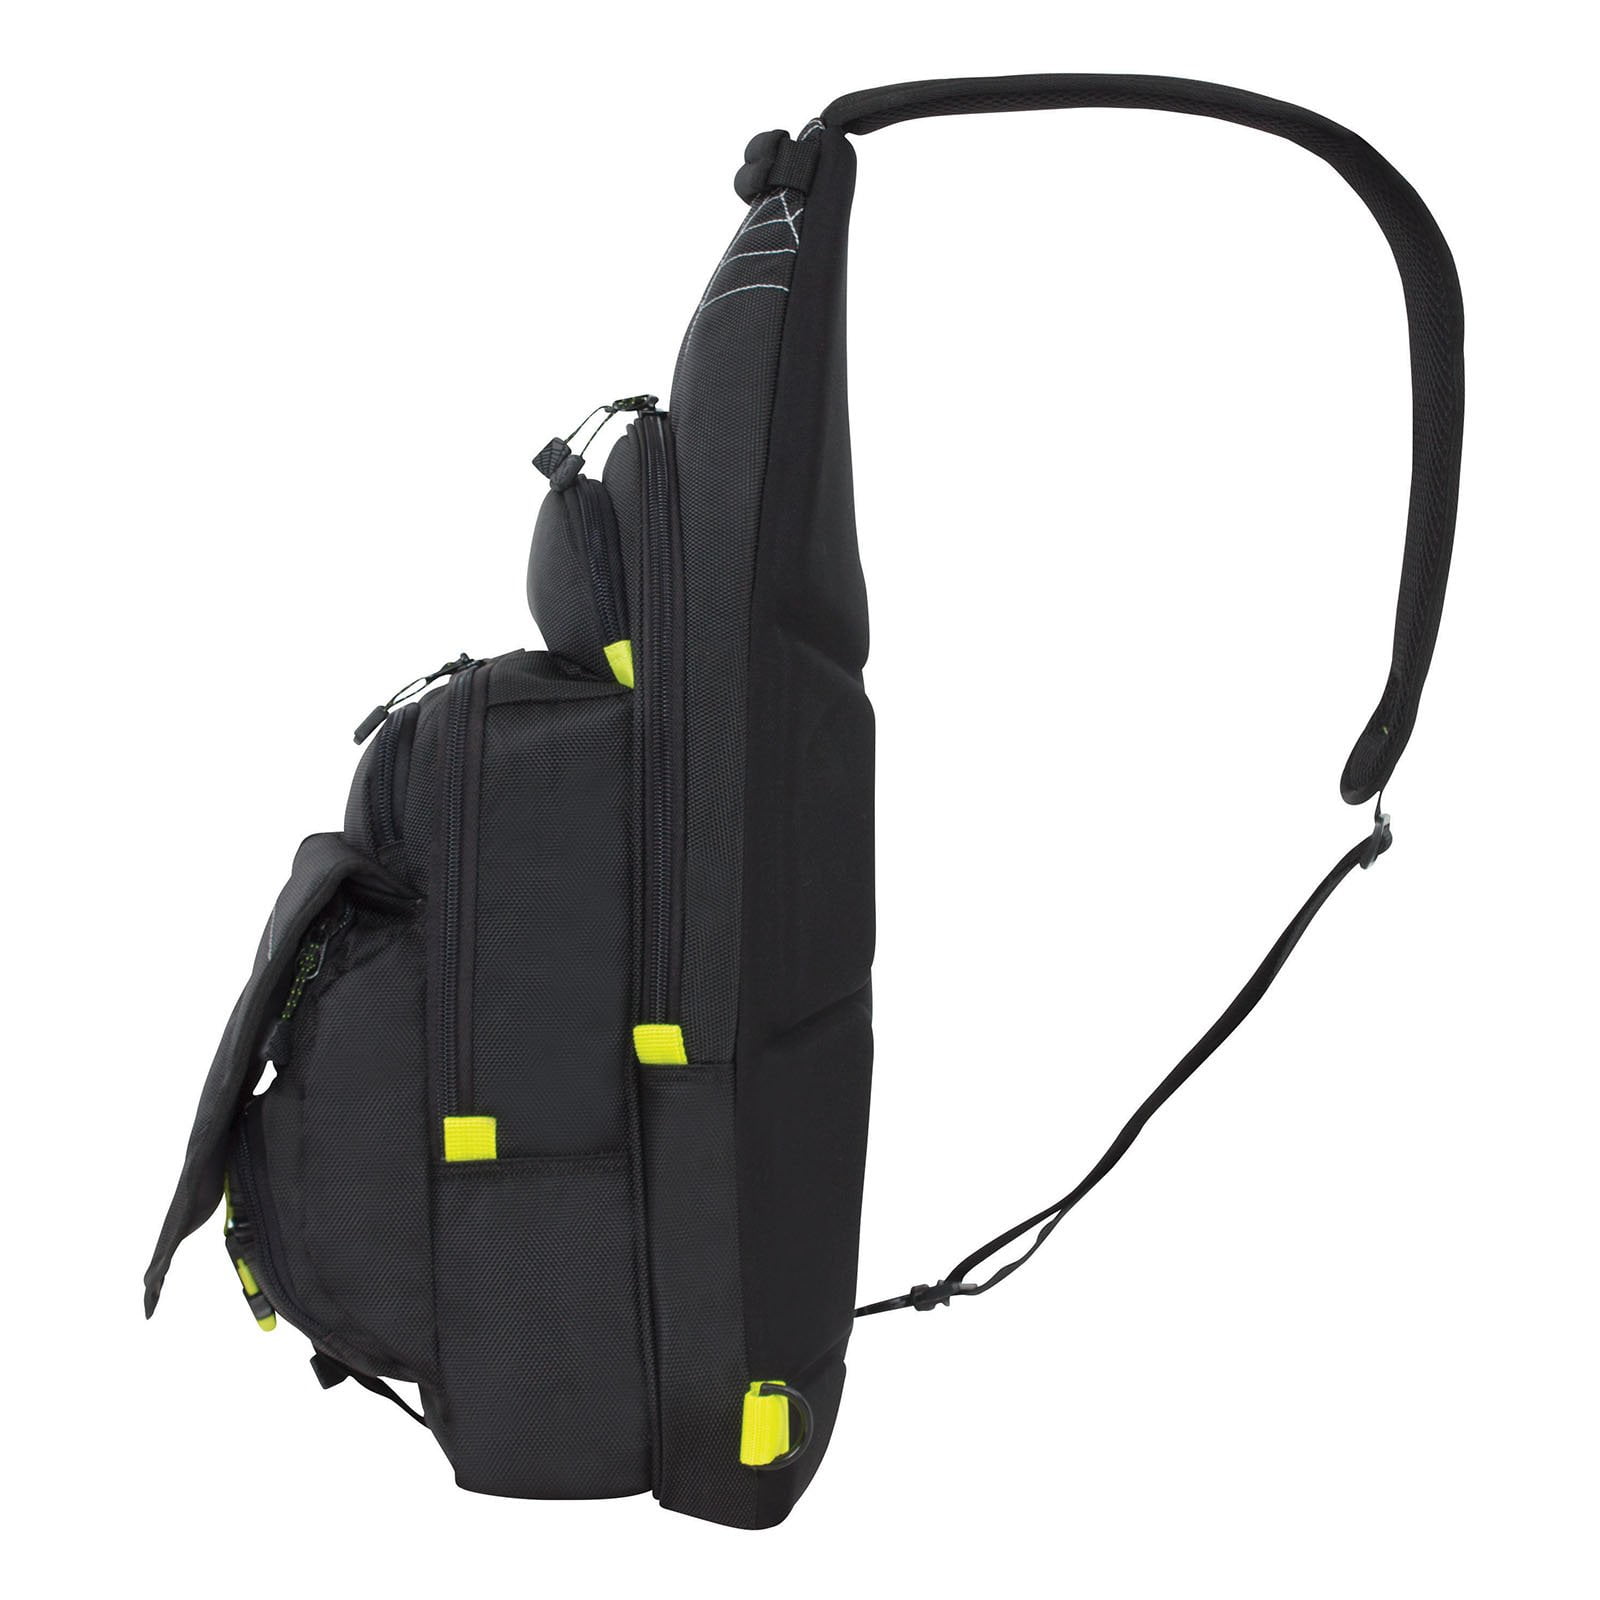 Spiderwire Sling Fishing Backpack, 15-Liter